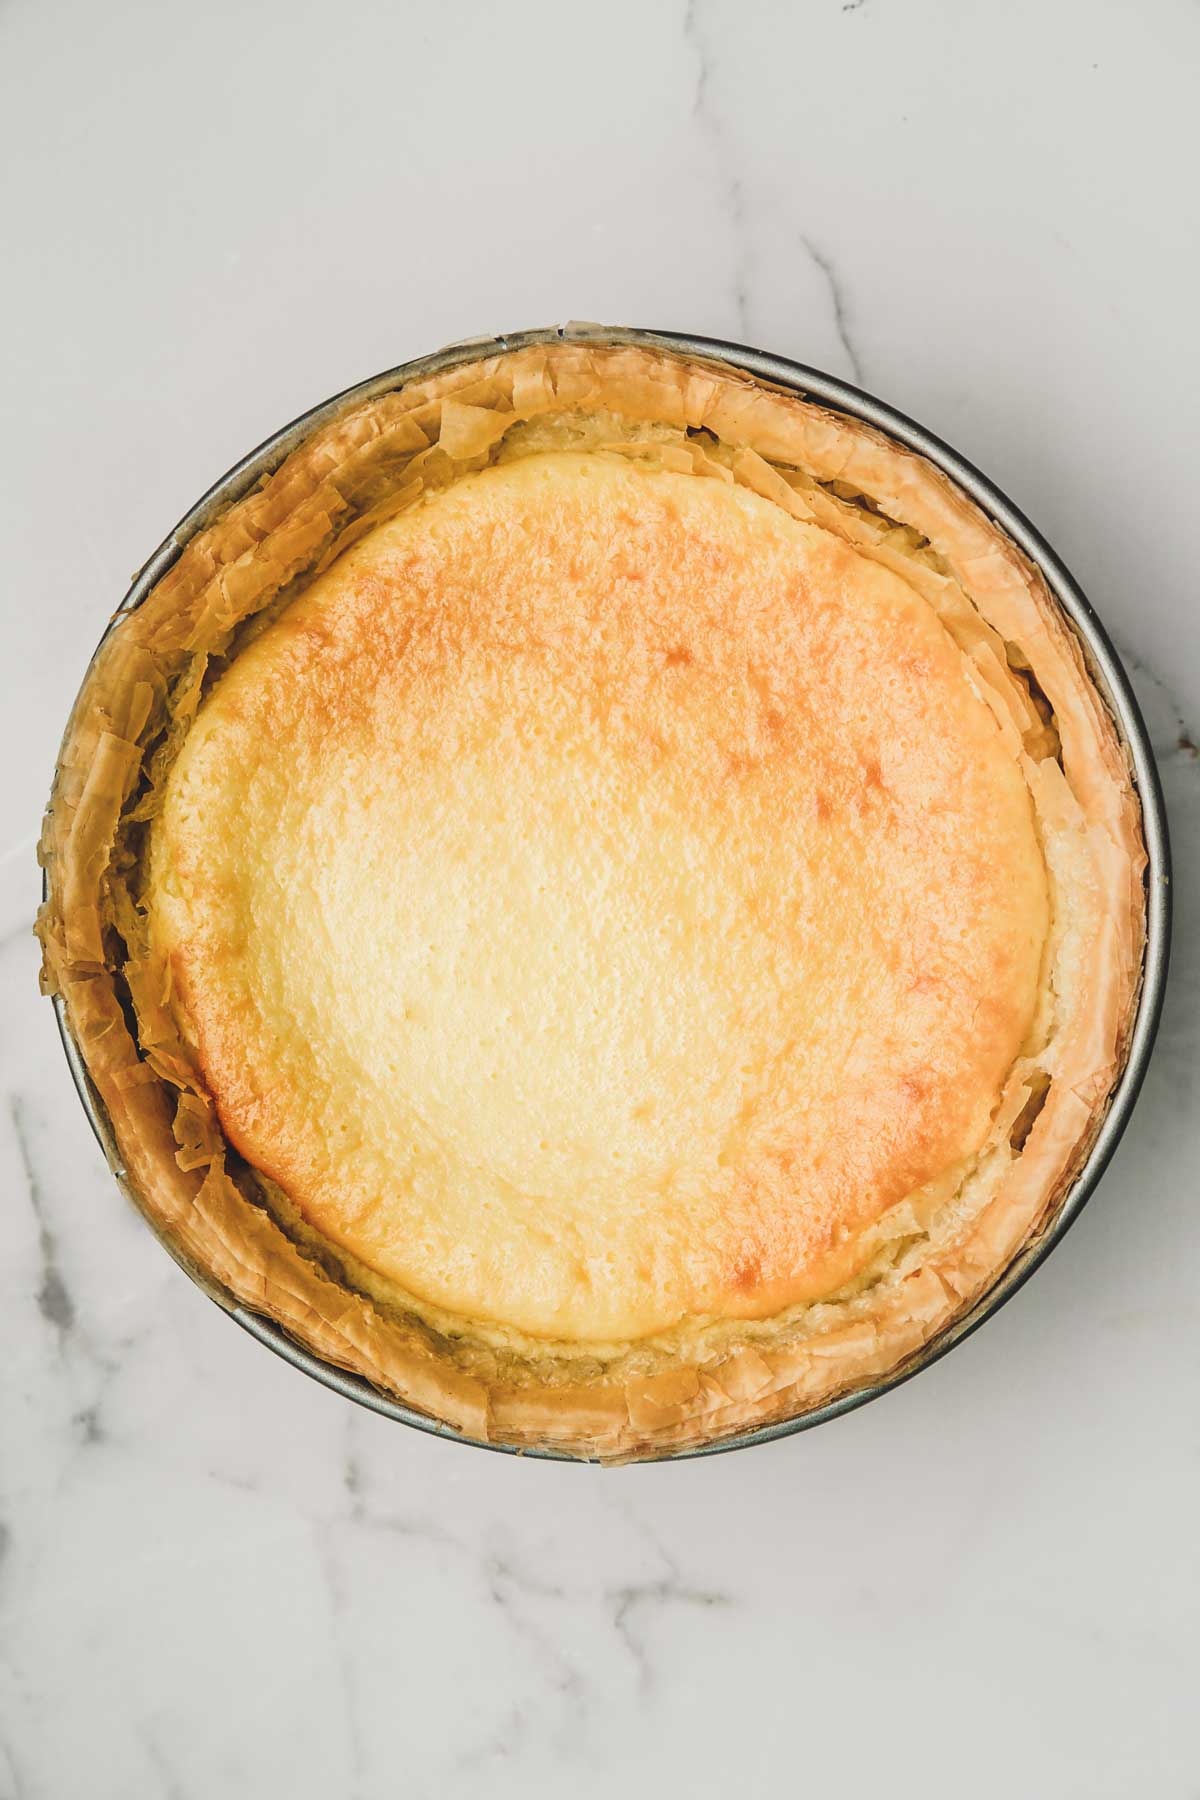 springform pan with baked cheesecake